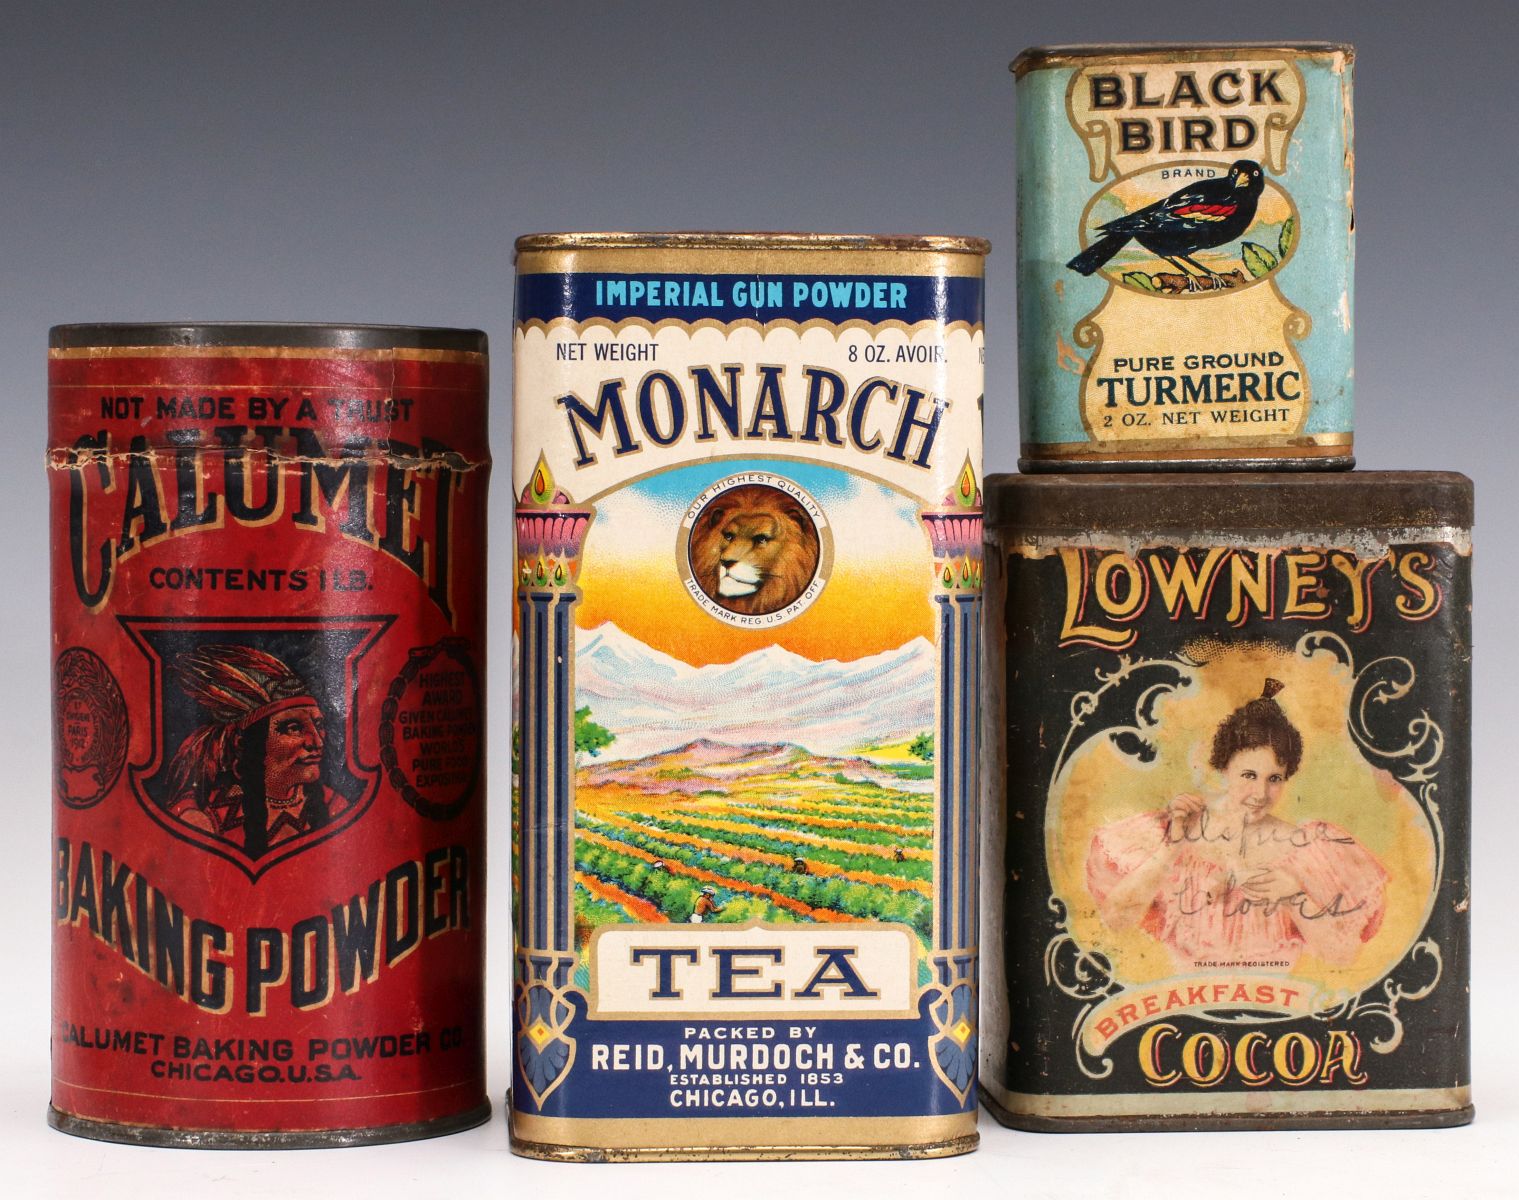 1900s BAKING POWDER, TEA, AND COCOA CONTAINERS